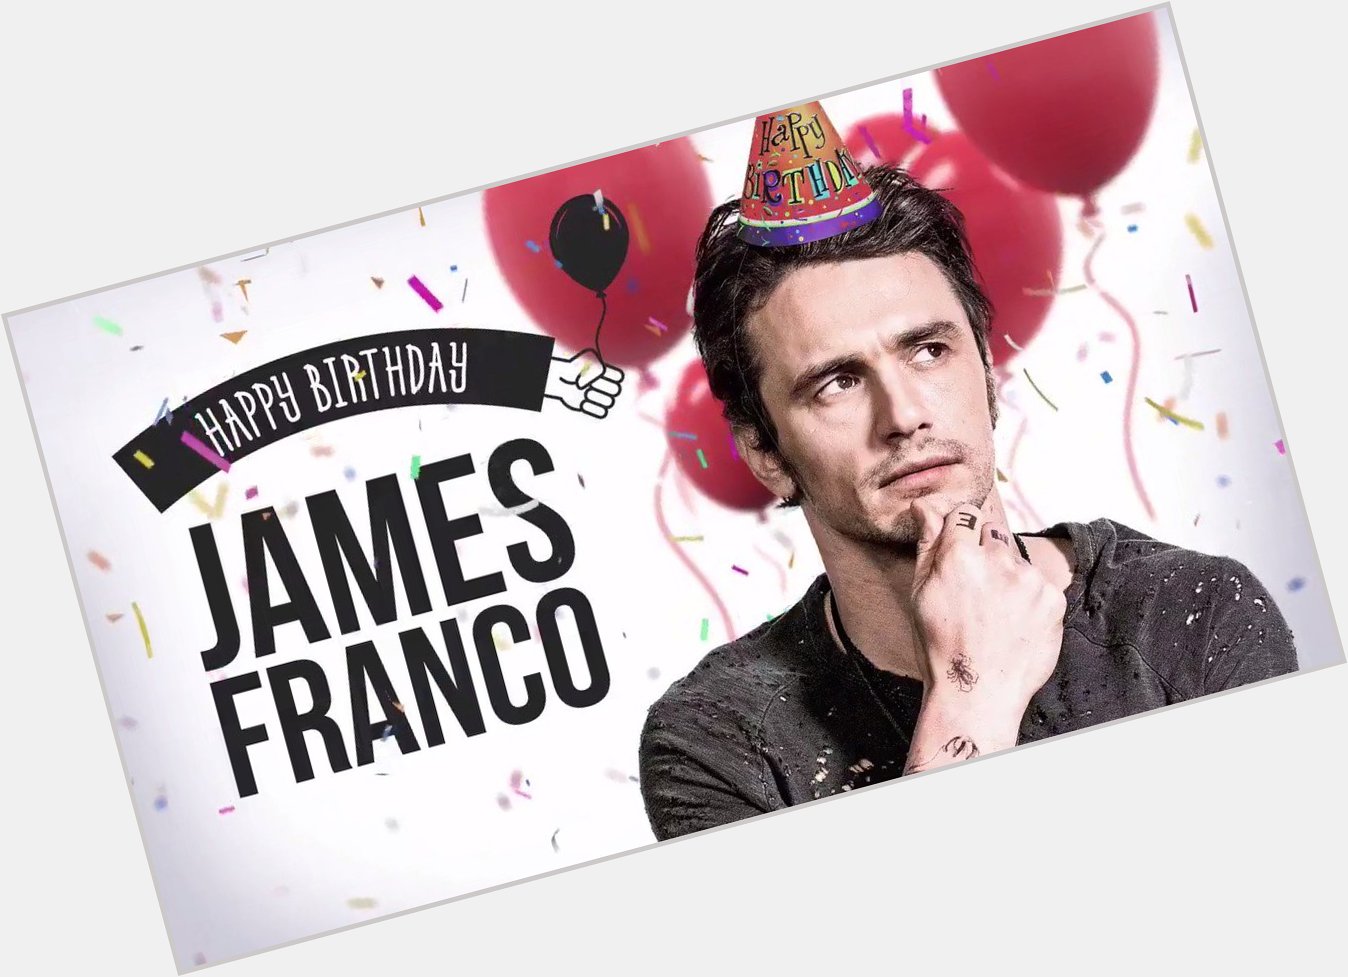 Help us wish James Franco a happy birthday. Make sure to seal it with a KISS. 